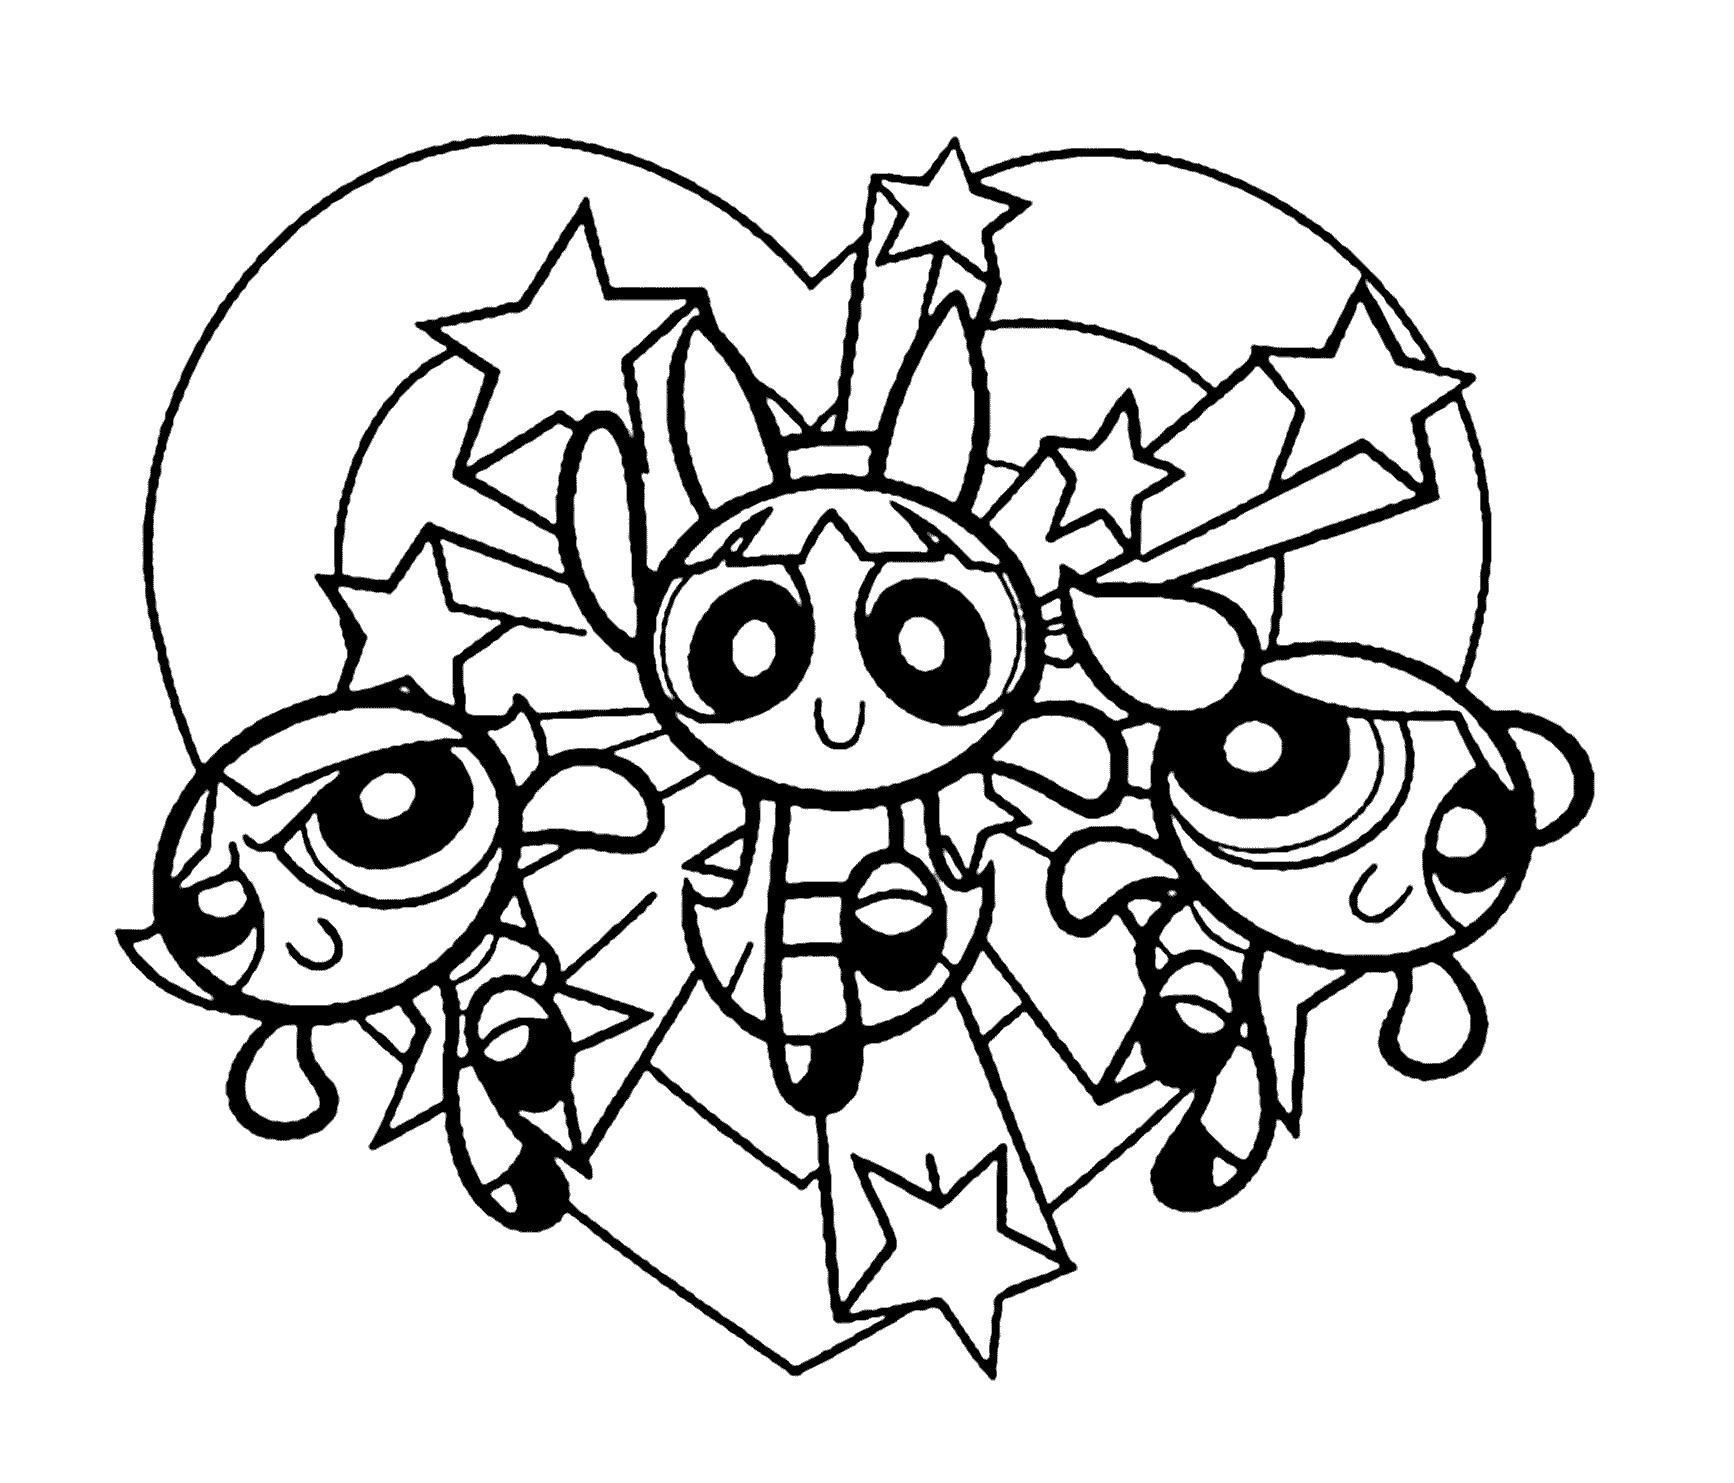 Powerpuff Girls Coloring Pages
 Coloring Pages For Girls 9 10